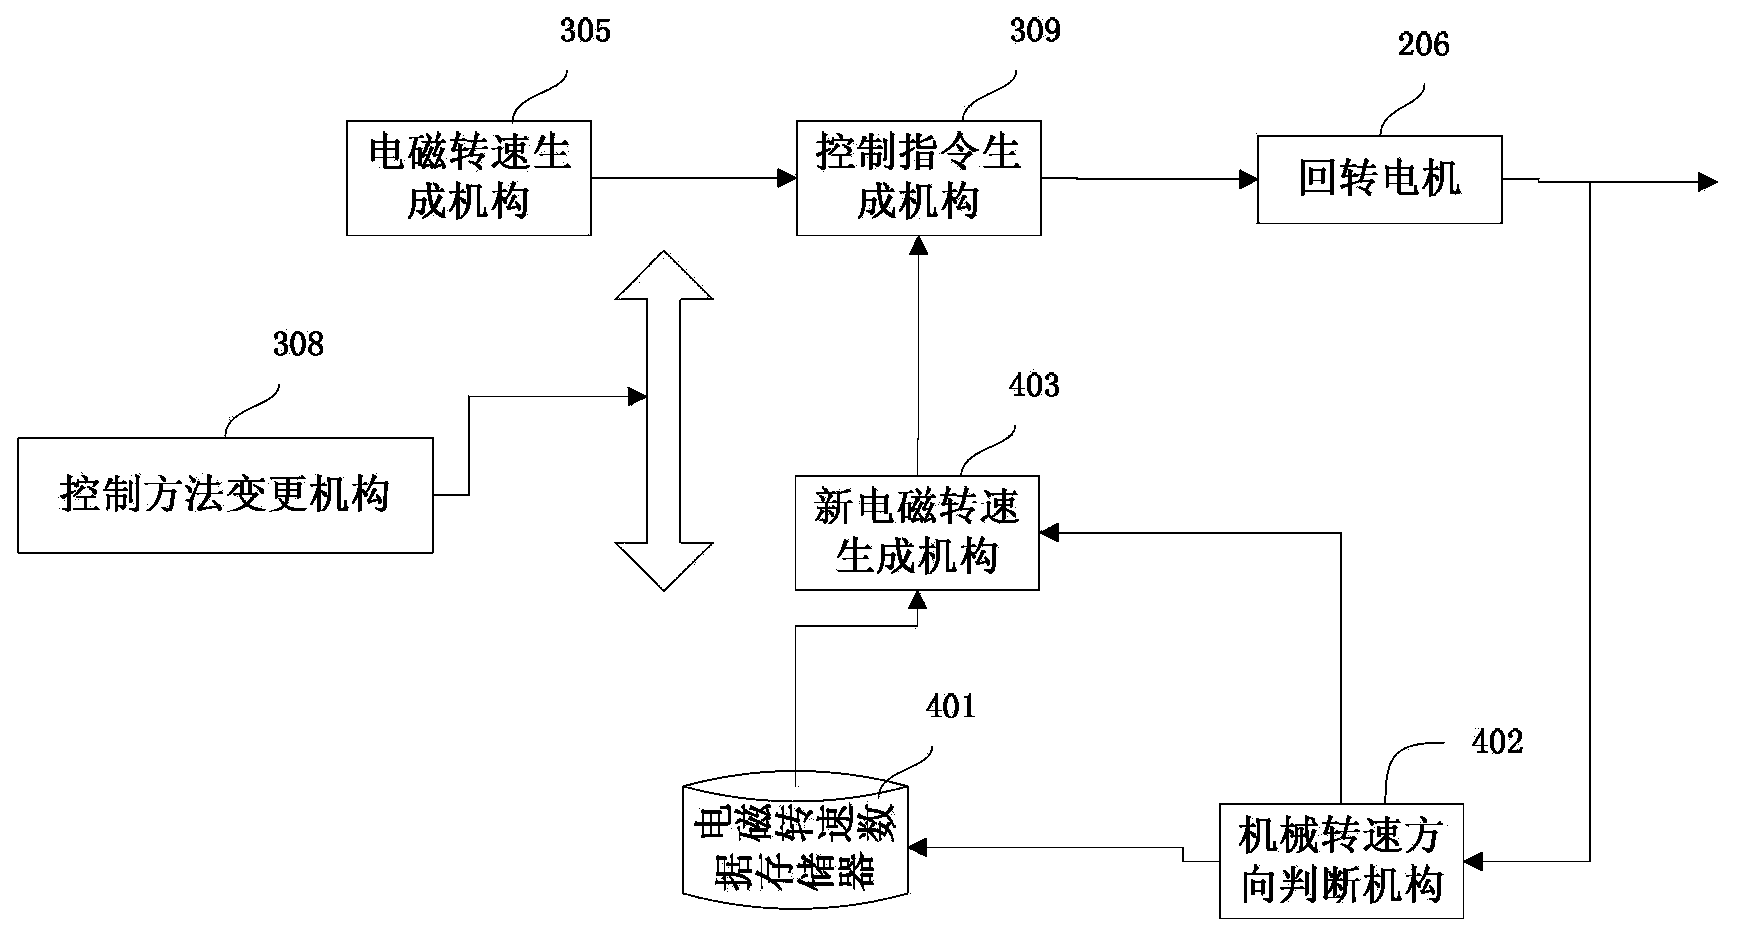 Method and system for engineering machinery control and excavator